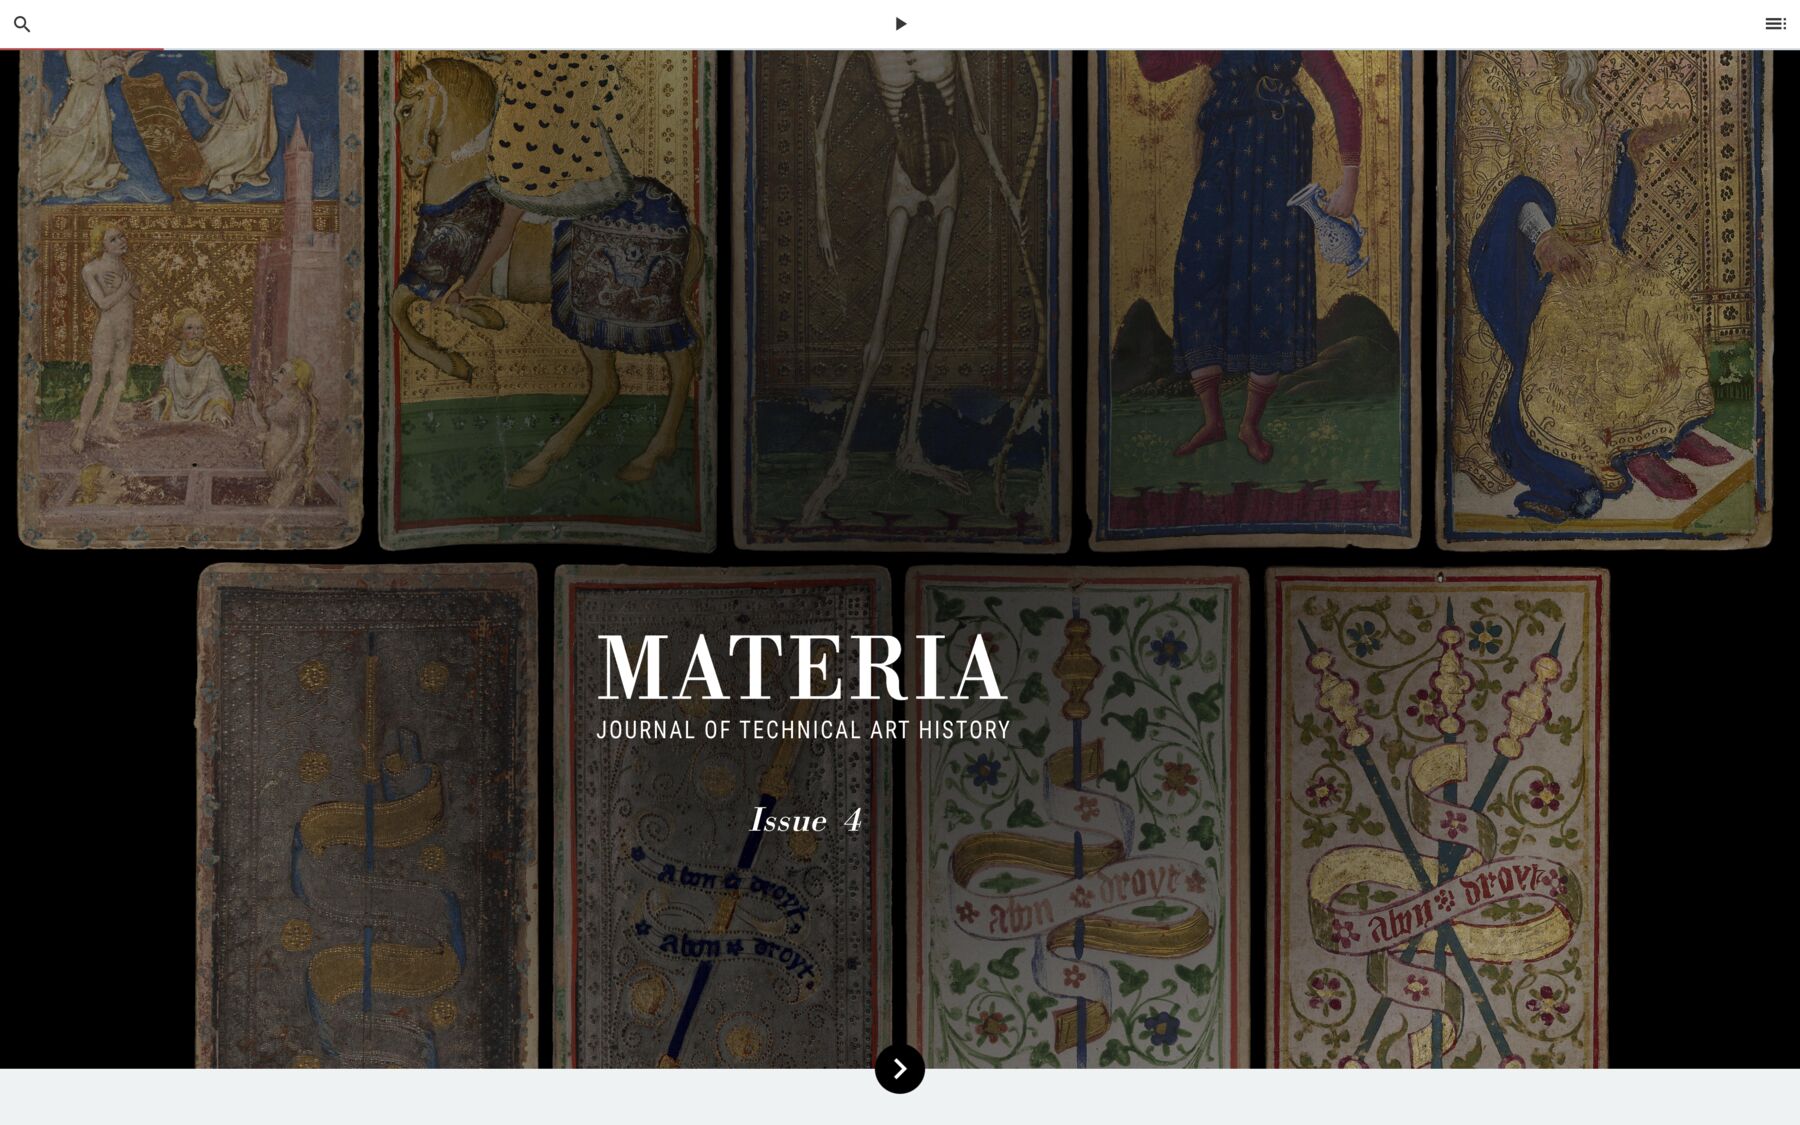 Materia: Journal of Technical Art History, Issue 4